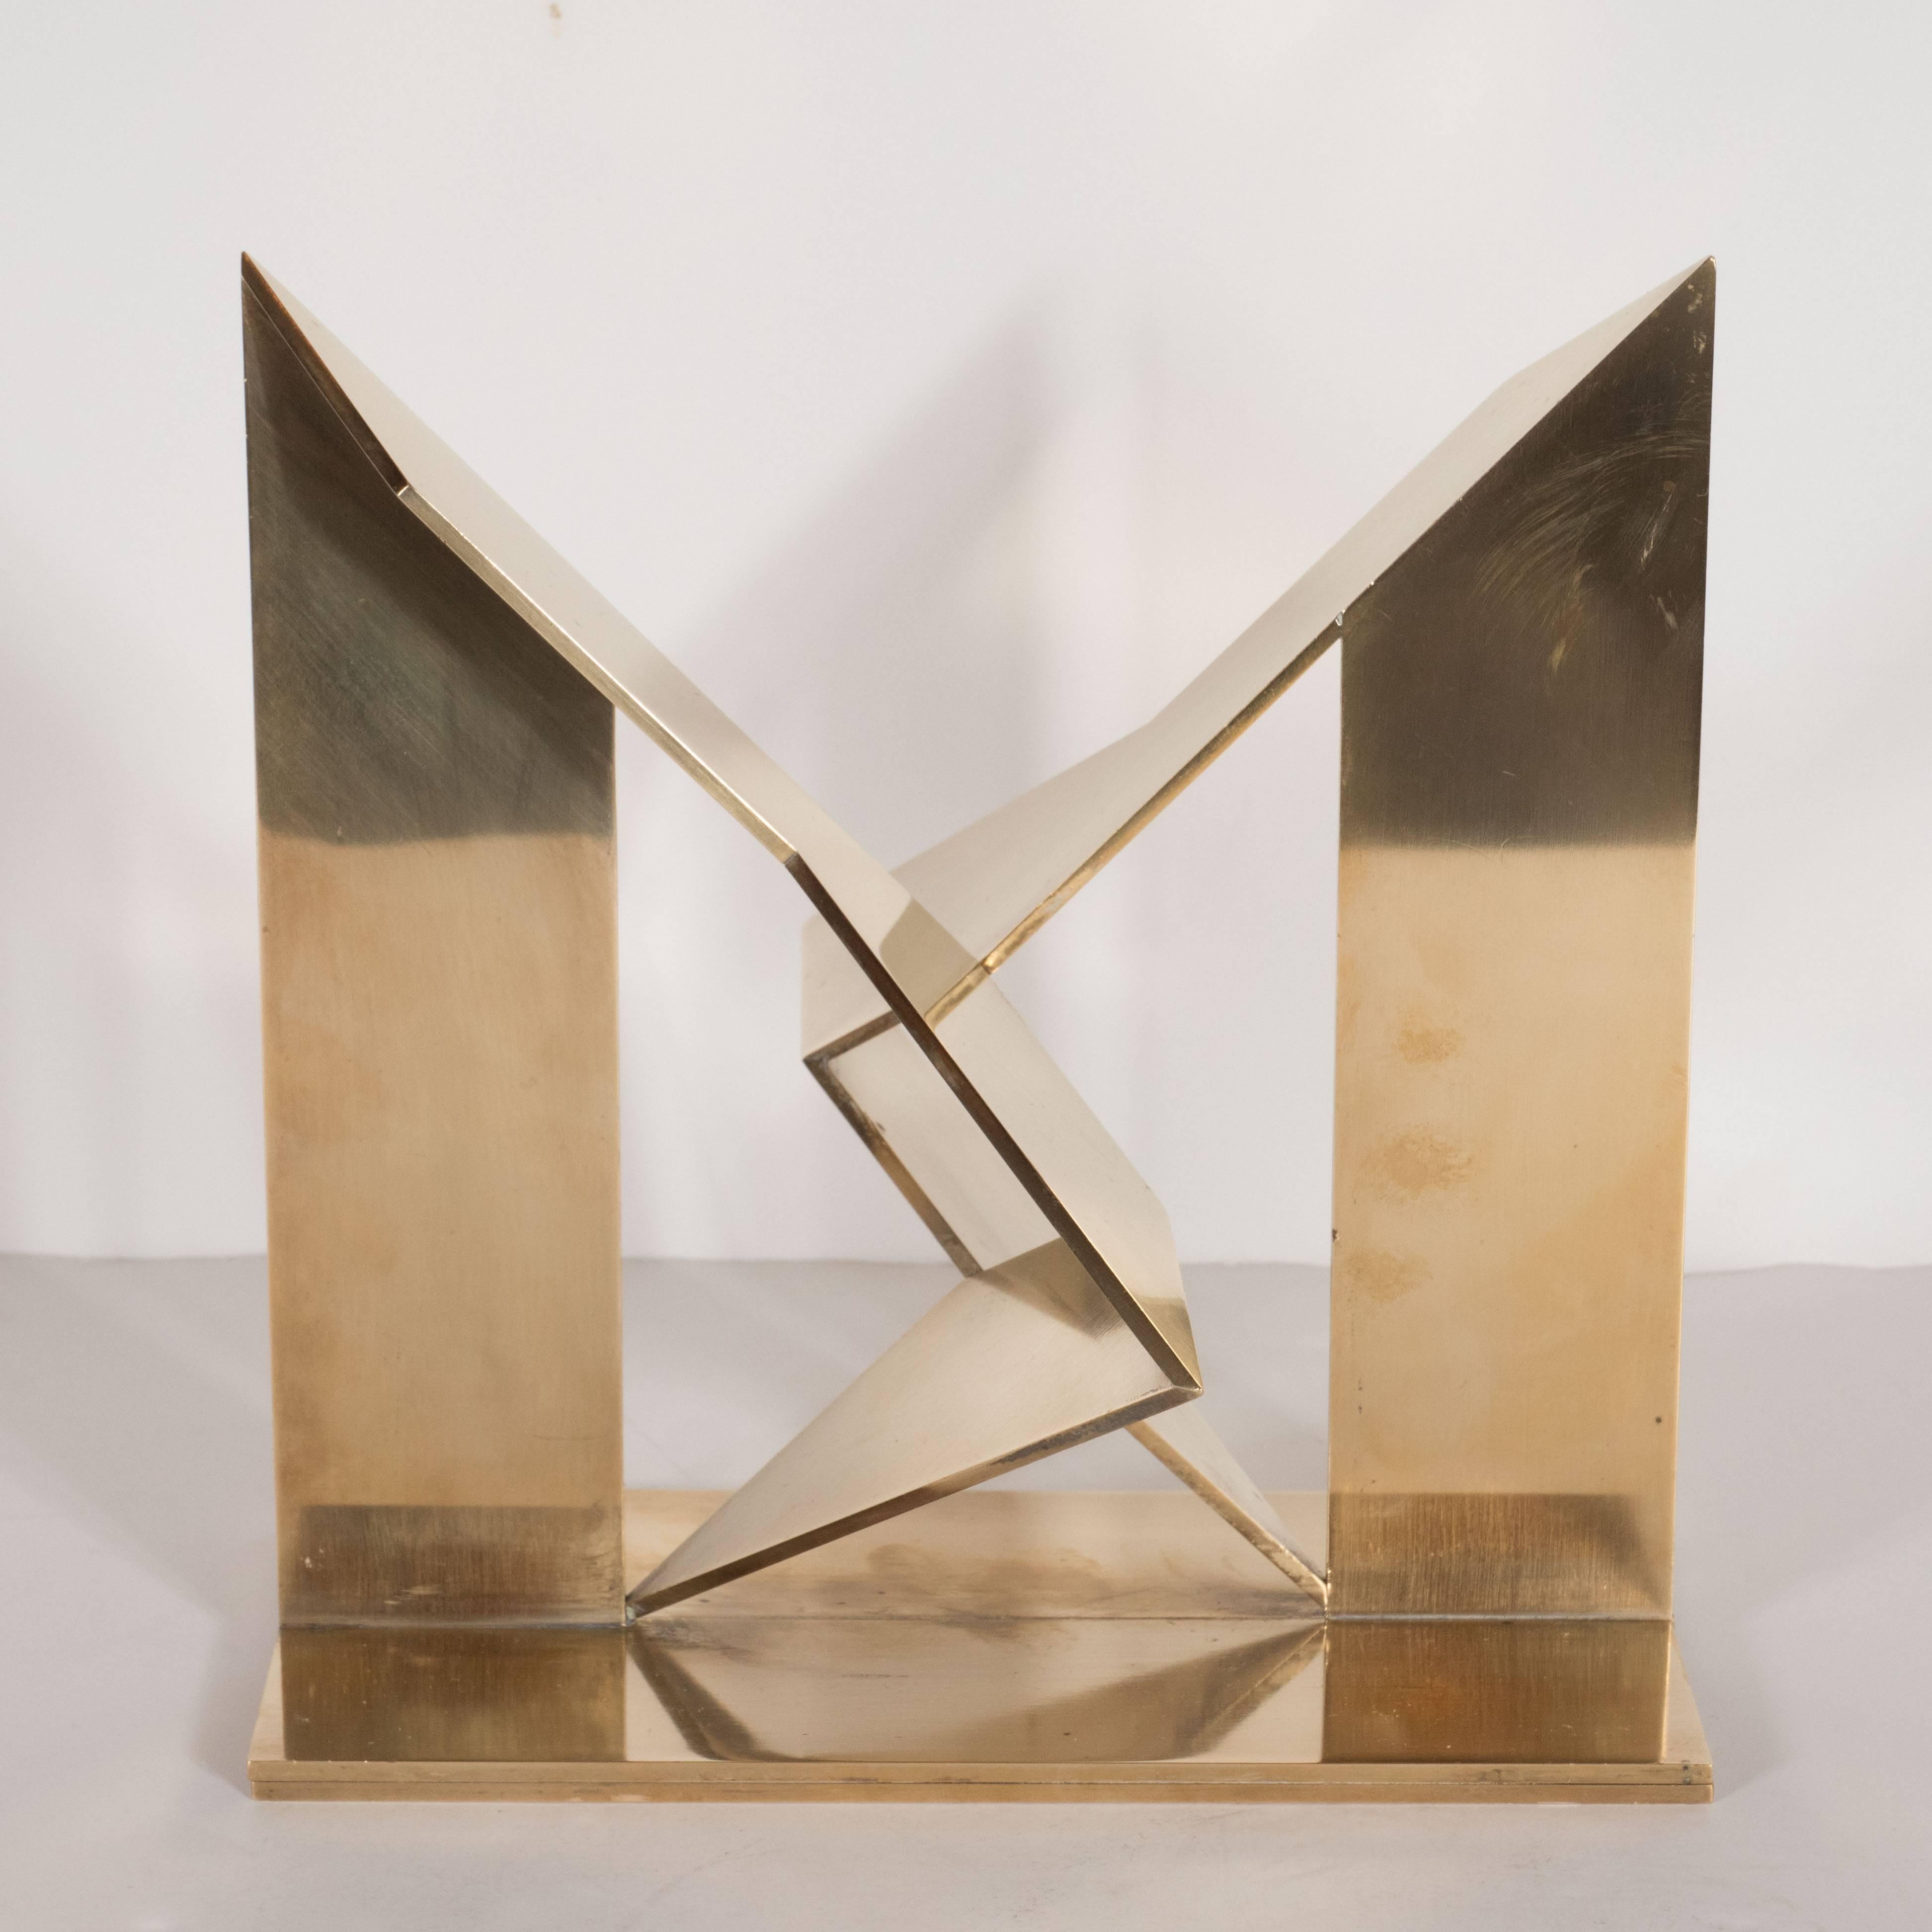 This lustrous brass sculpture features two geometric forms in palendromic symmetry that kiss at the center of the plinth. Mathias Goeritz (b. 1917, Germany), the esteemed Mexican artist, realized this dynamic sculpture in 1978. The excellence of his